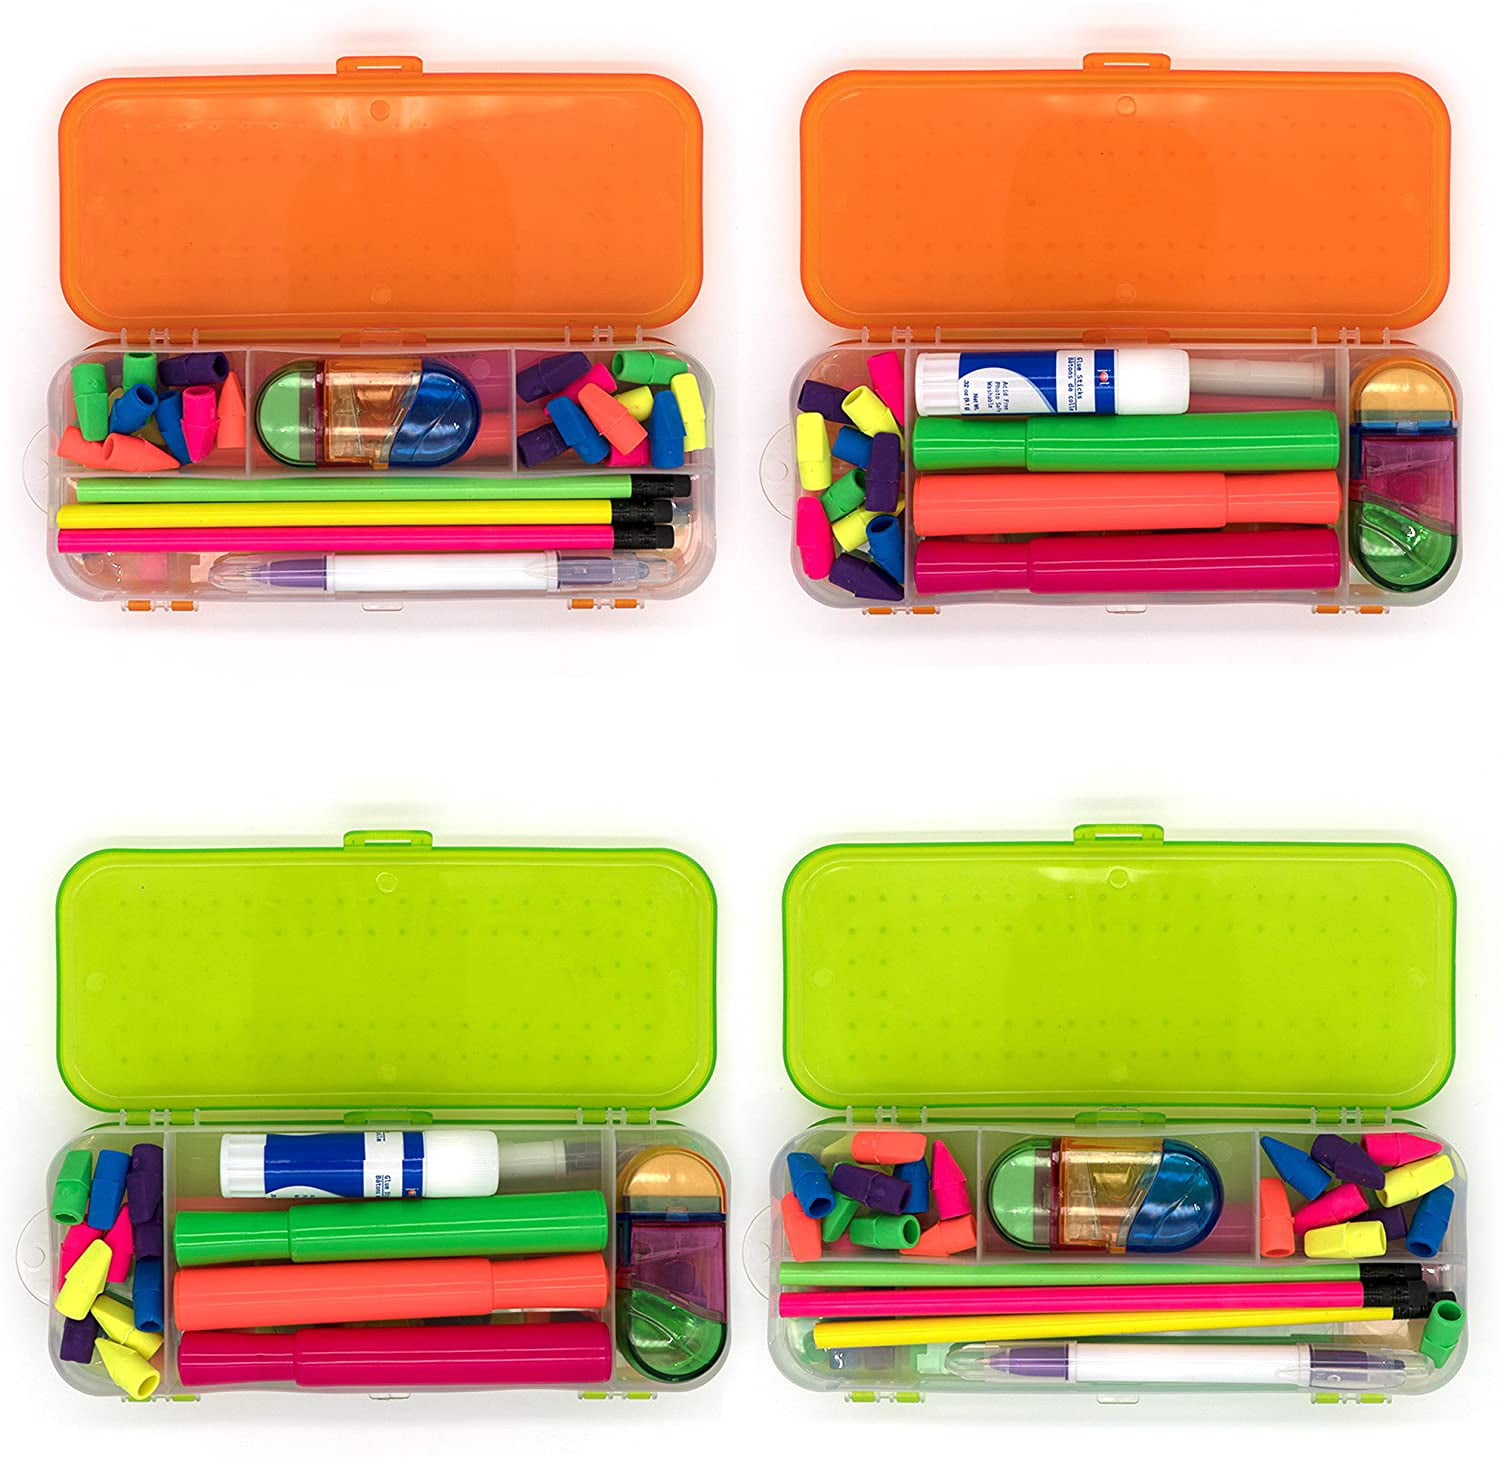 The Teachers' Lounge®  Pencil Box, Double Sided, Assorted Colors